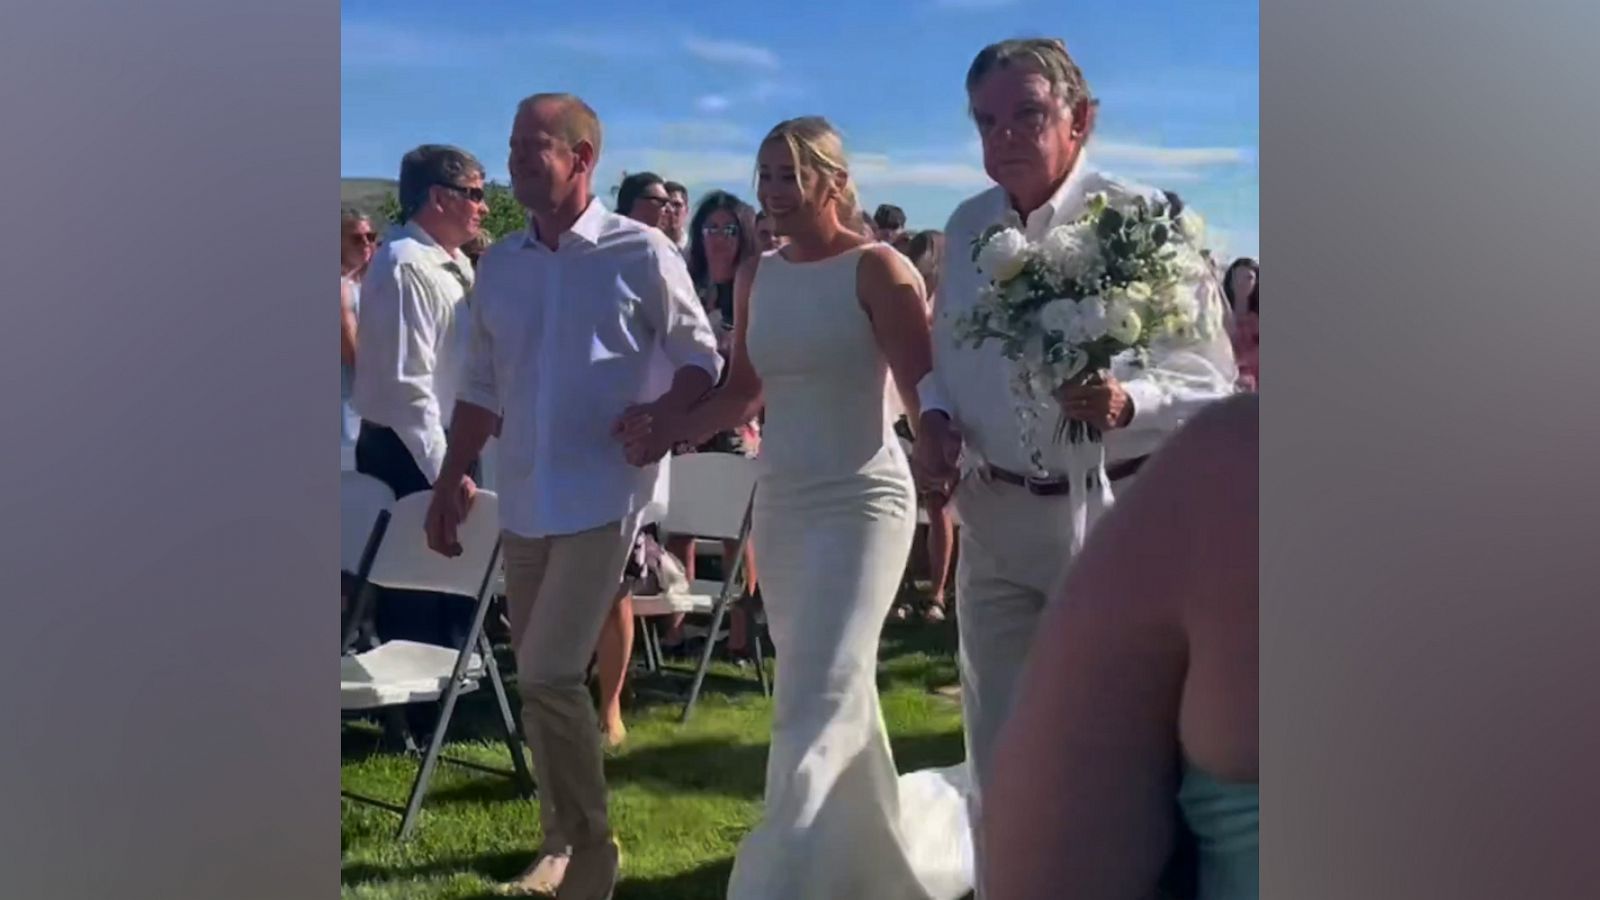 VIDEO: Bride walks down aisle with 15 important men in her life